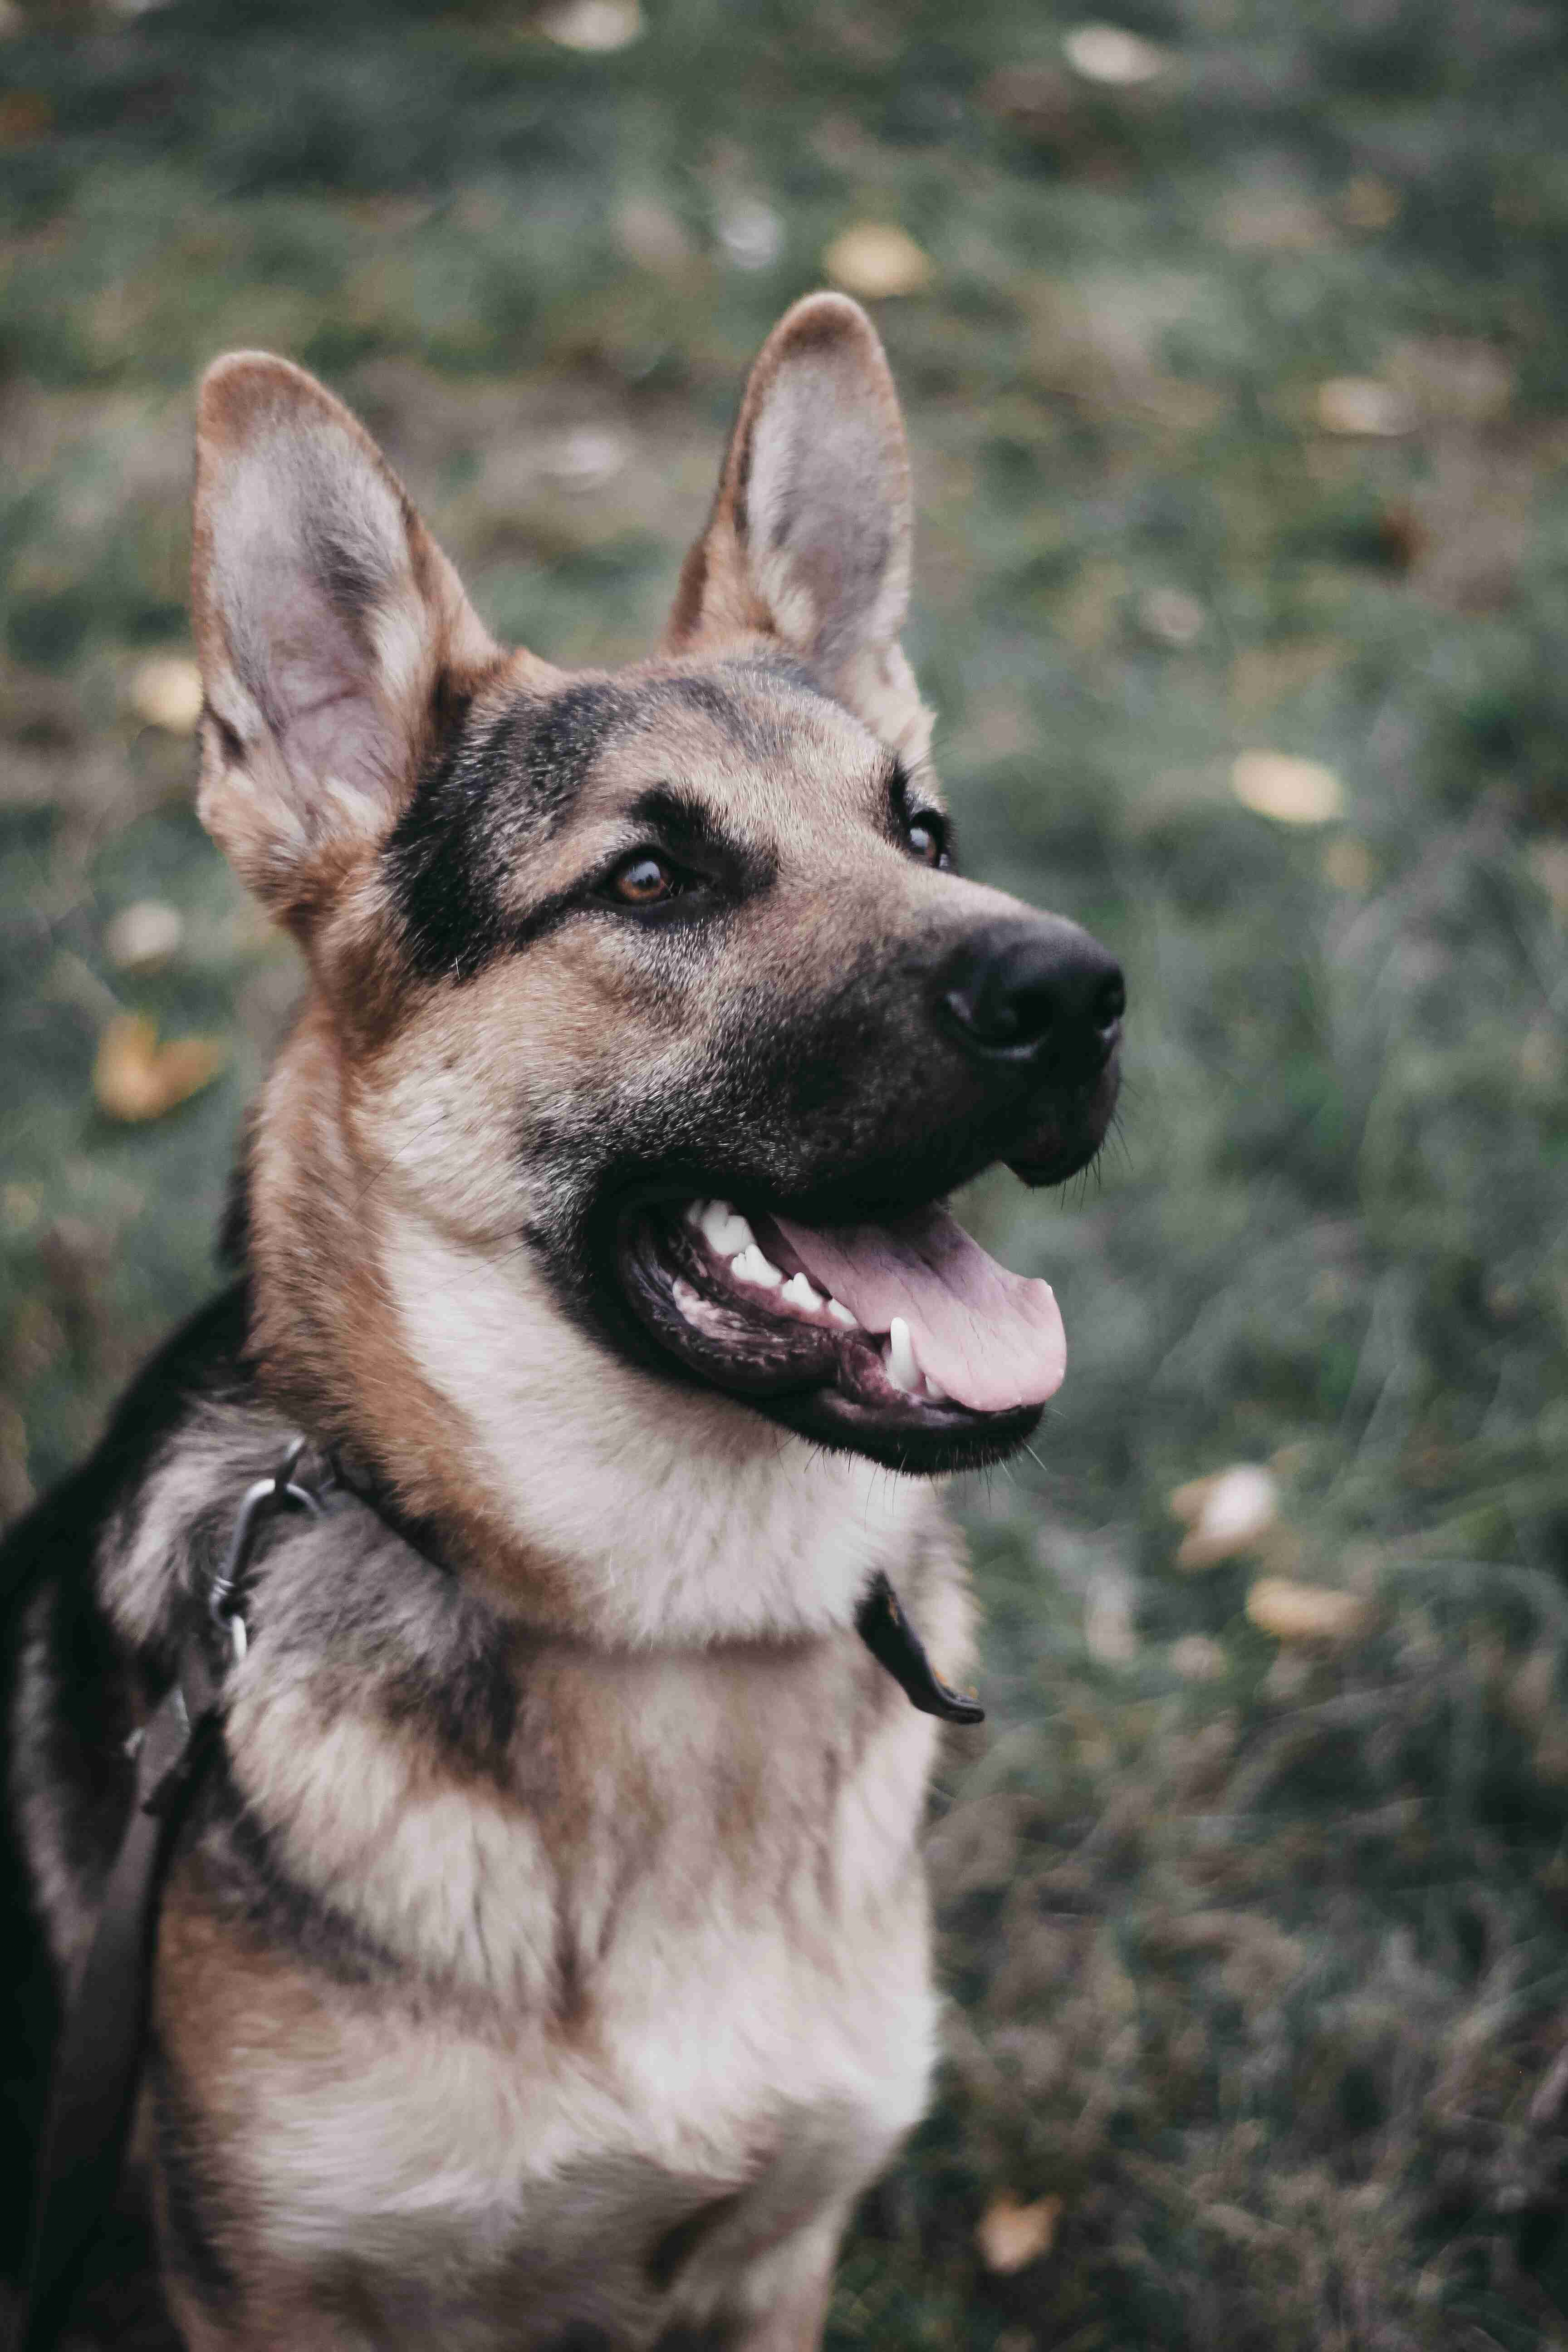 How do you handle aggressive behavior from your German Shepherd in an apartment complex?